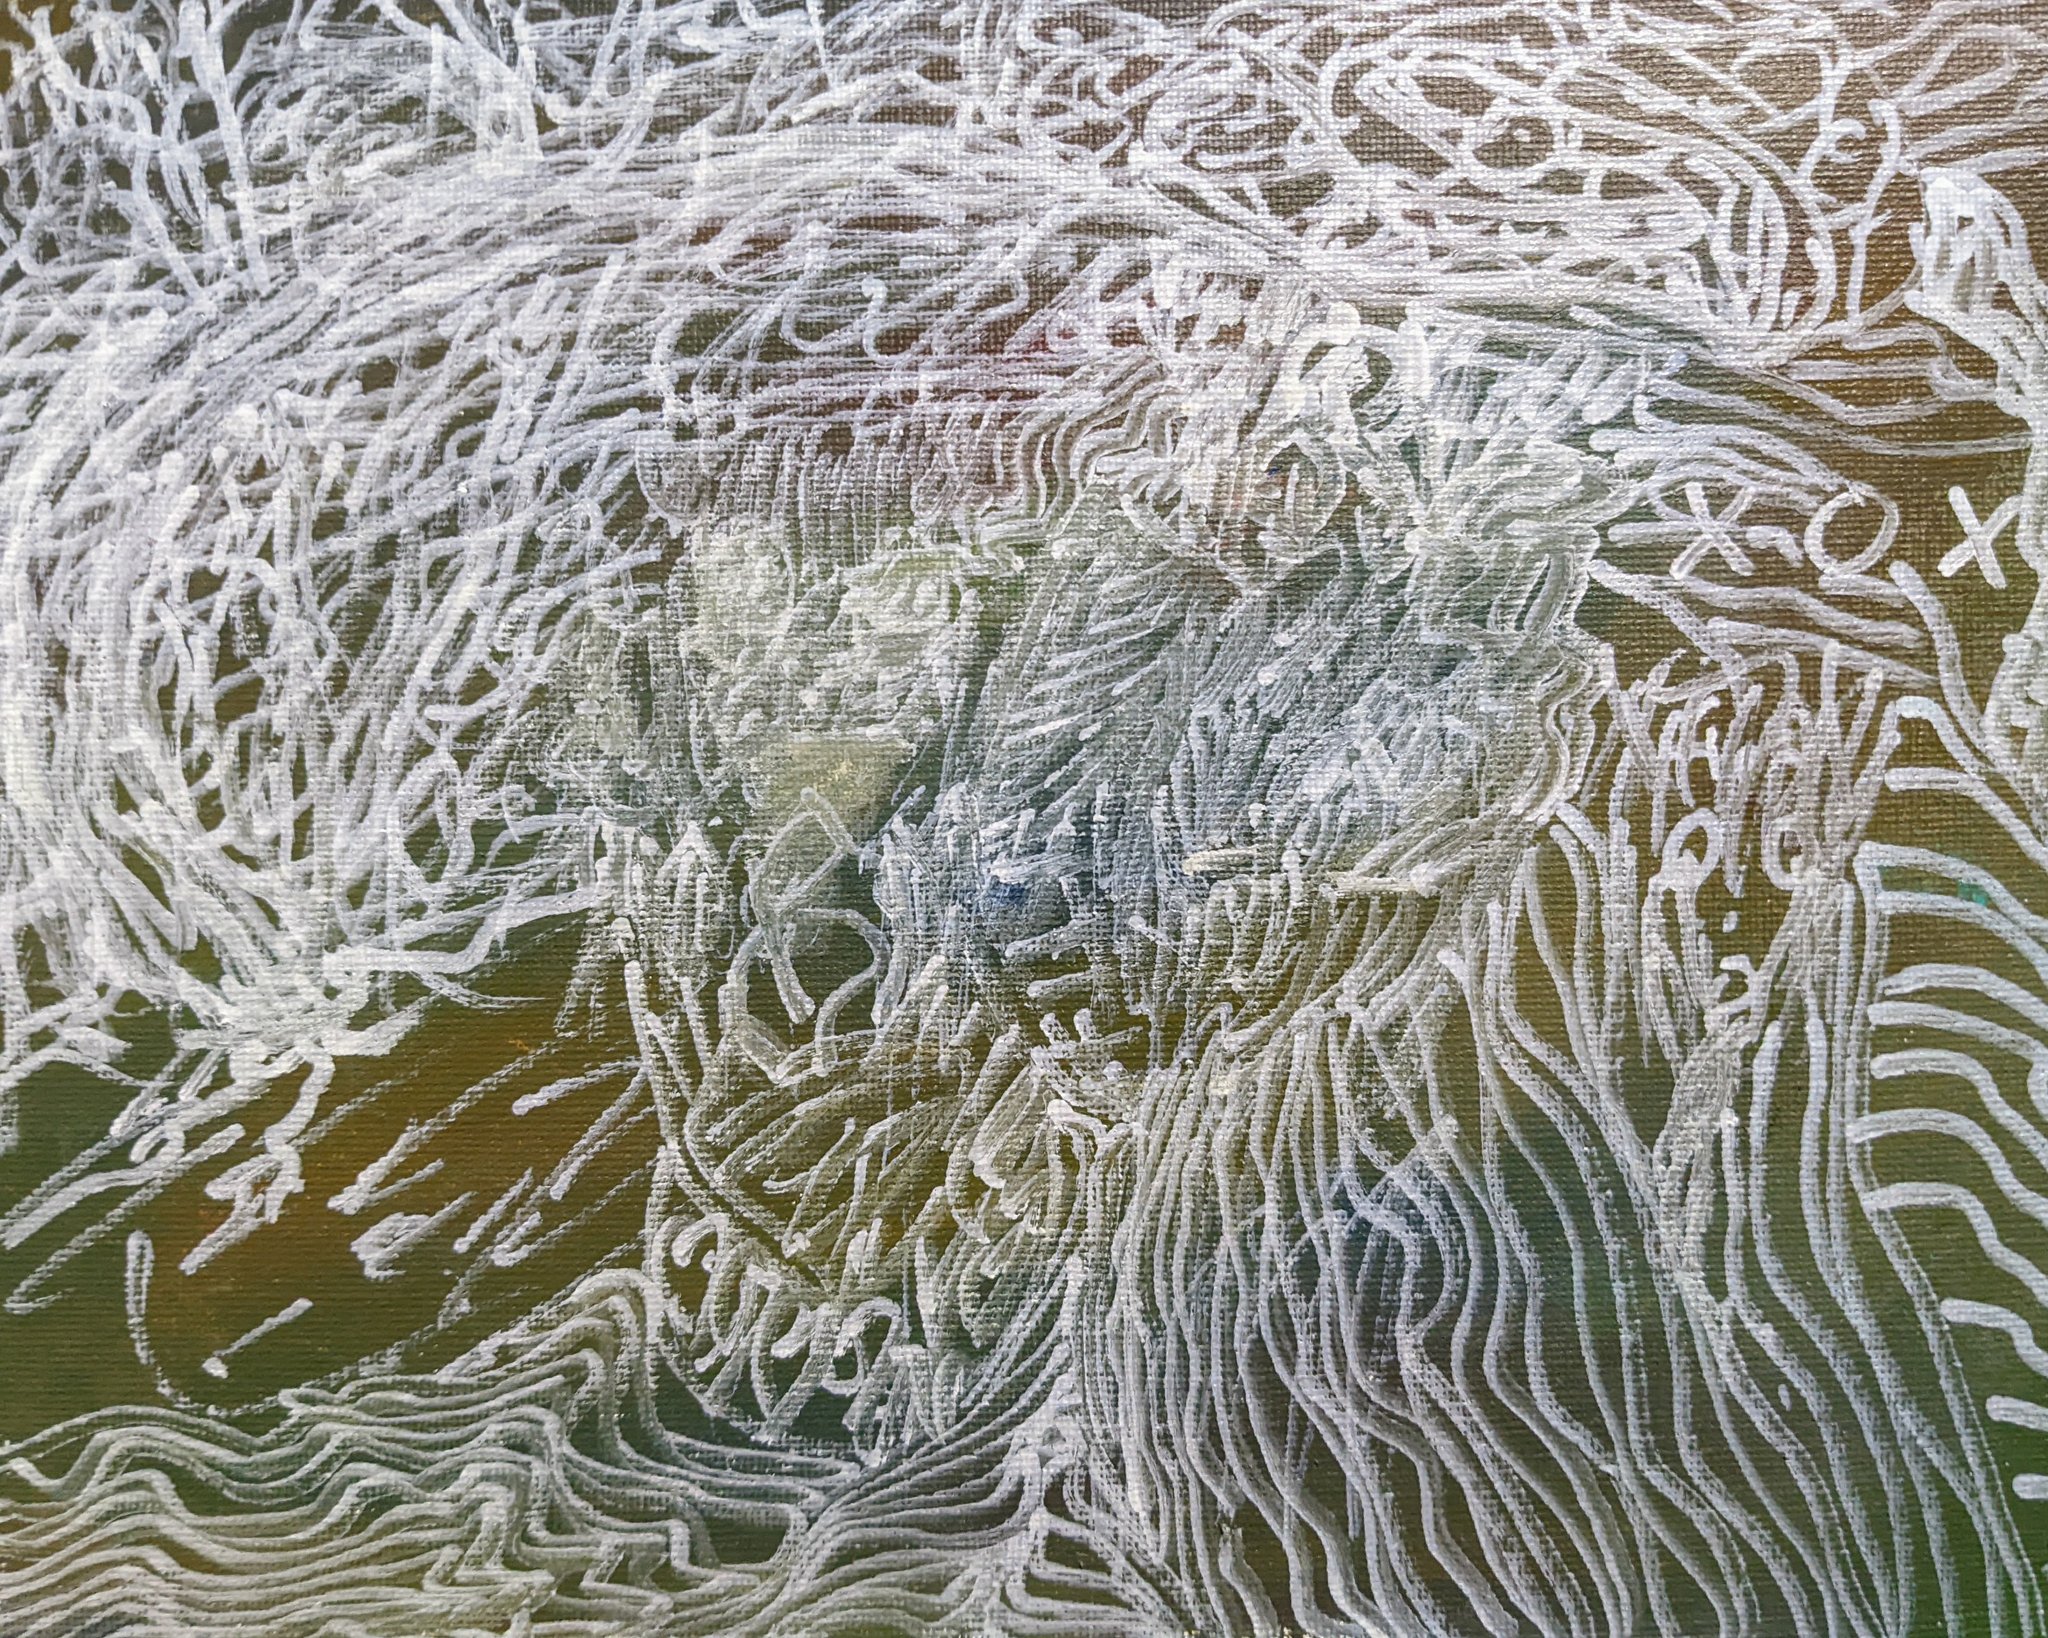 Streams of white wires on top of a swampy background